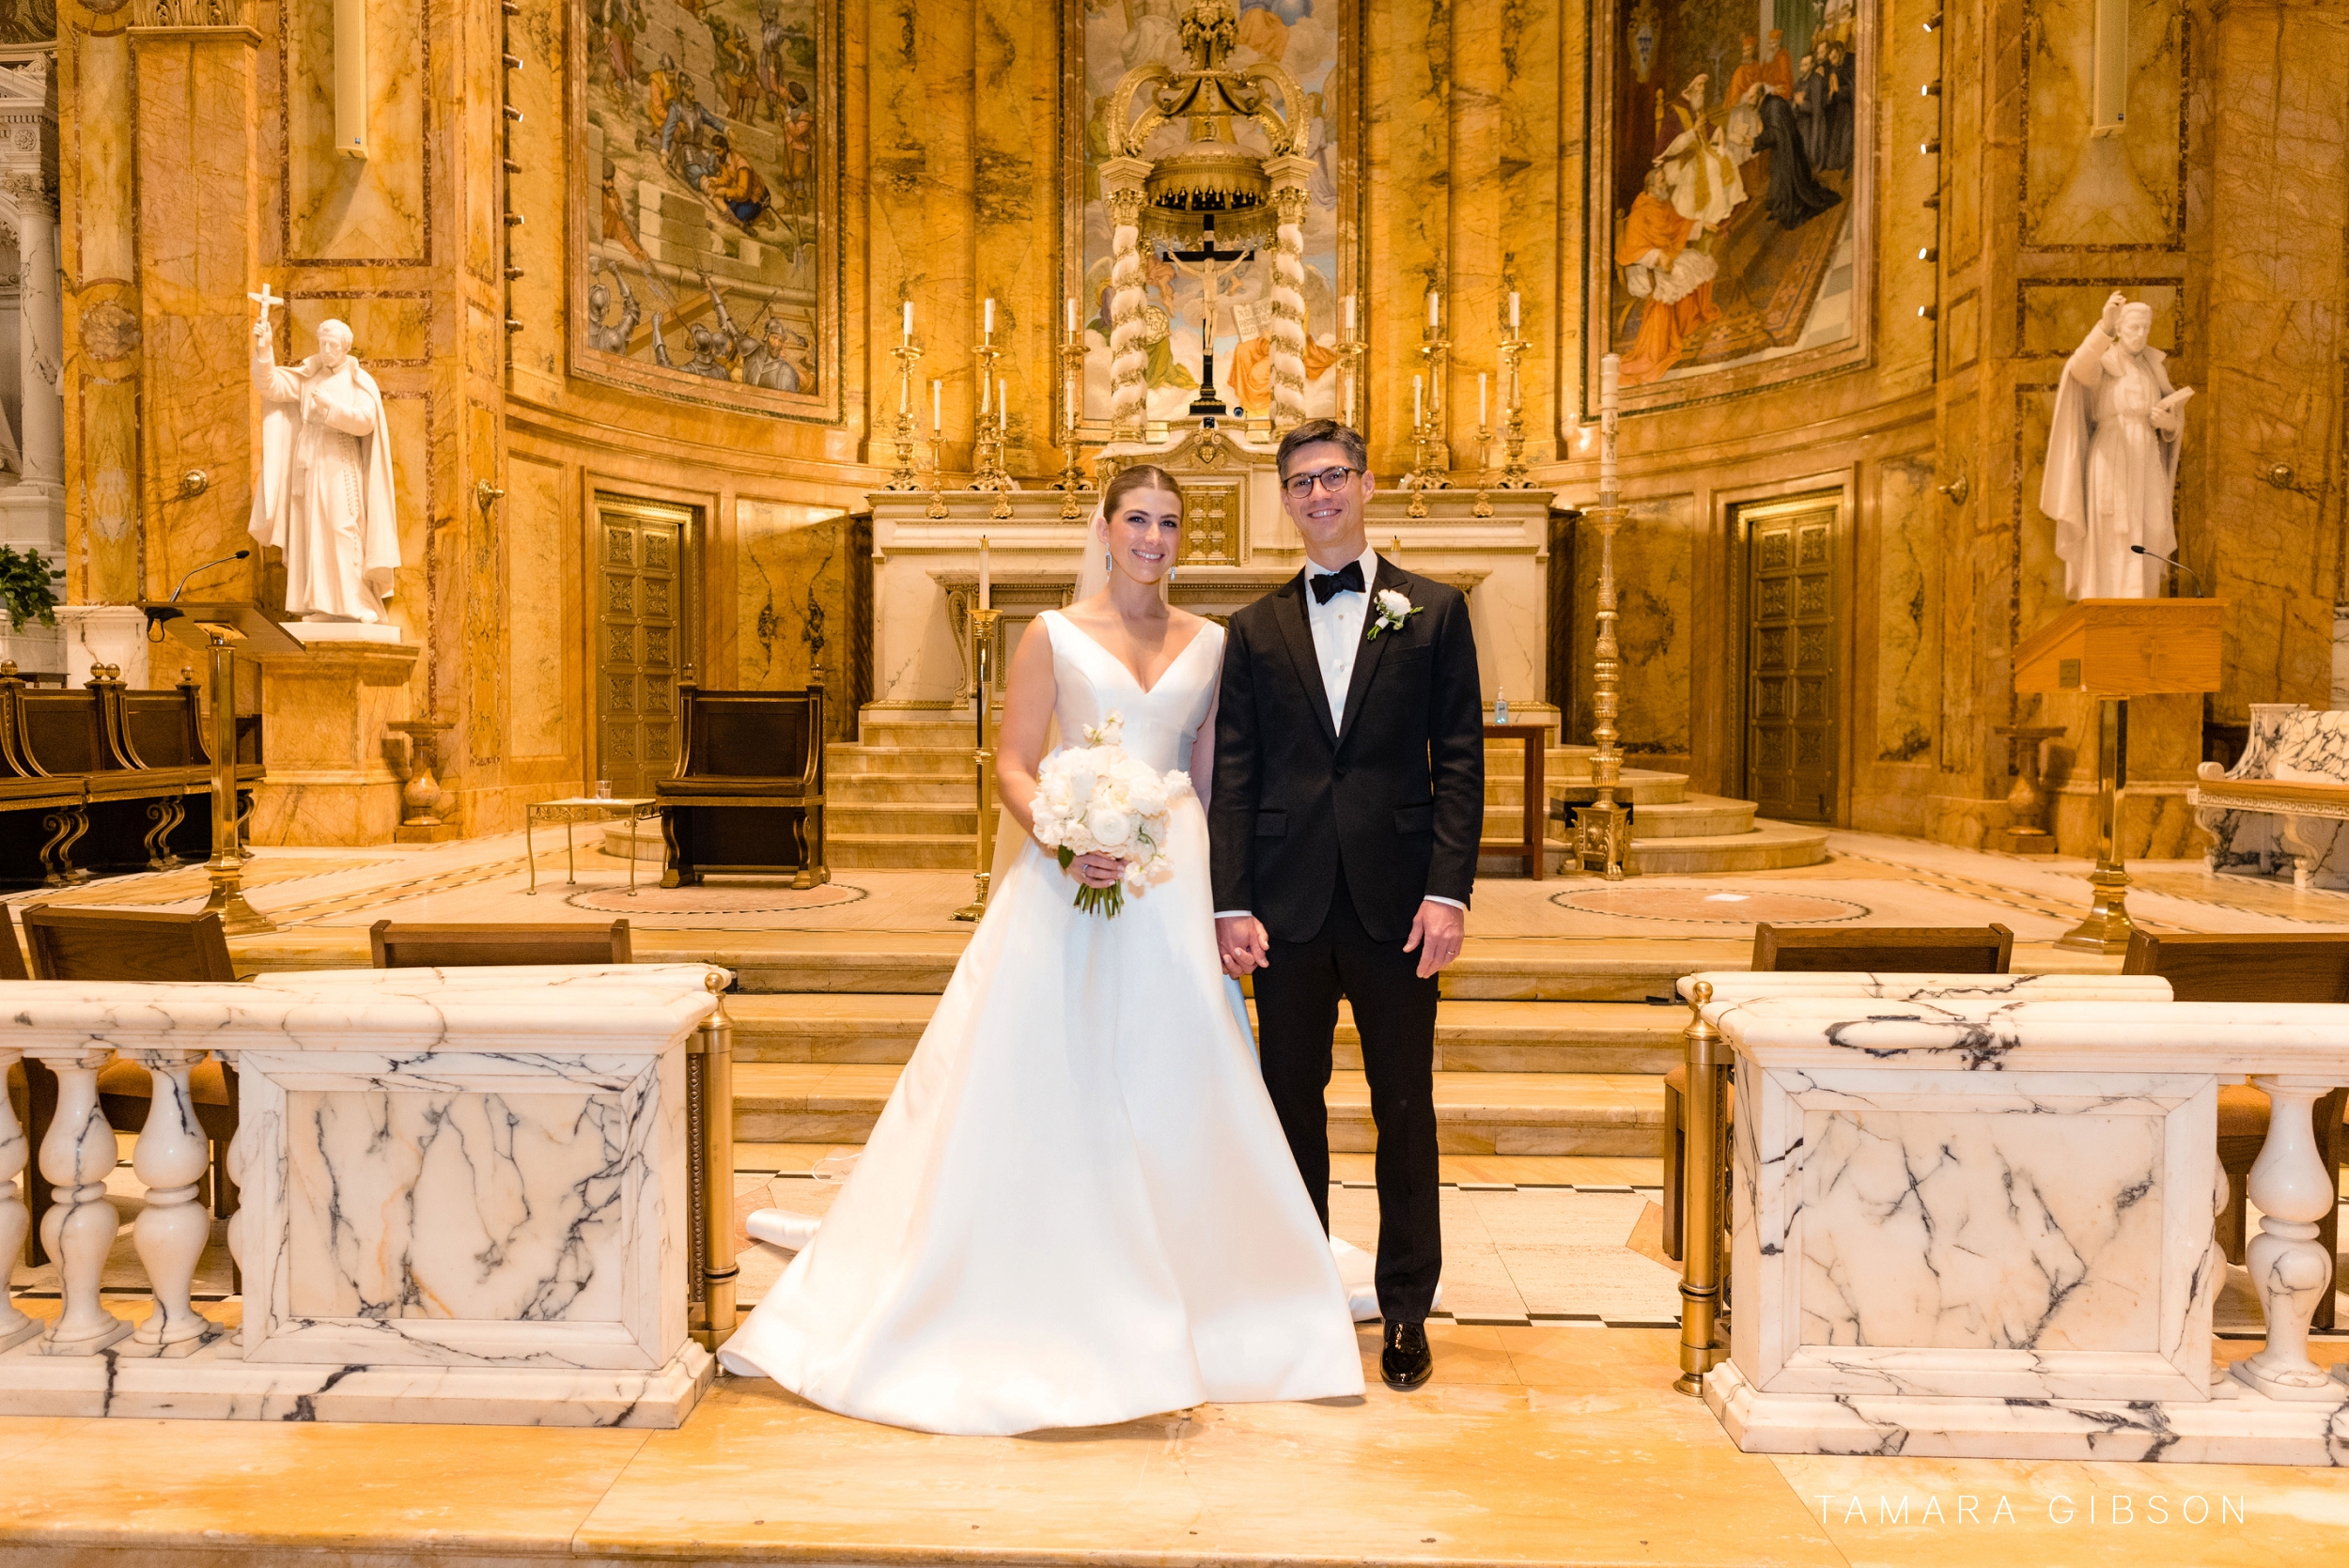 Victoria and Thomas in front of St. Ignatius of Loyola altar during NYC wedding